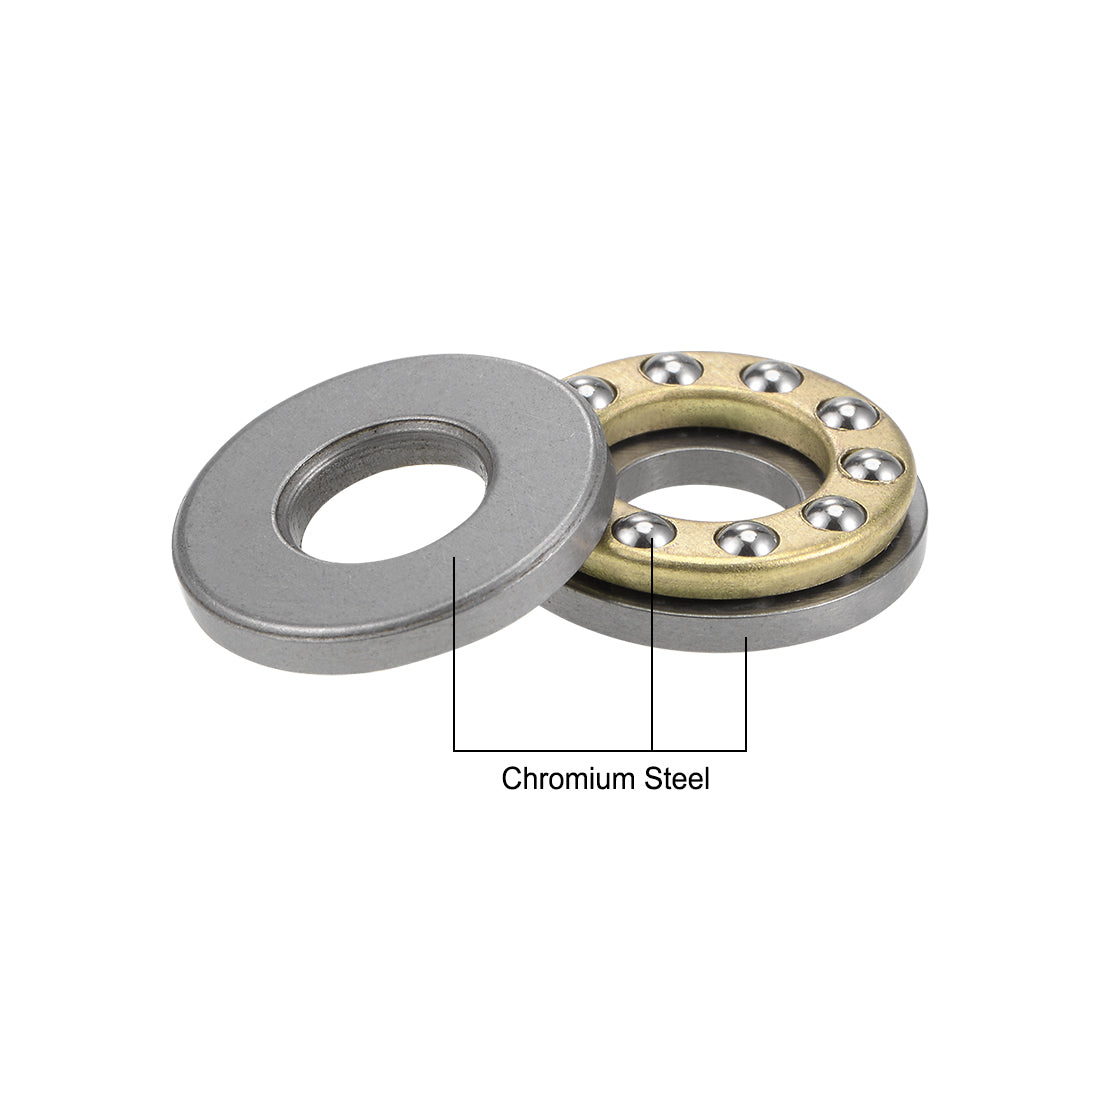 uxcell Uxcell F8-19M Miniature Thrust Ball Bearing 8x19x7mm Chrome Steel with Washer 5Pcs